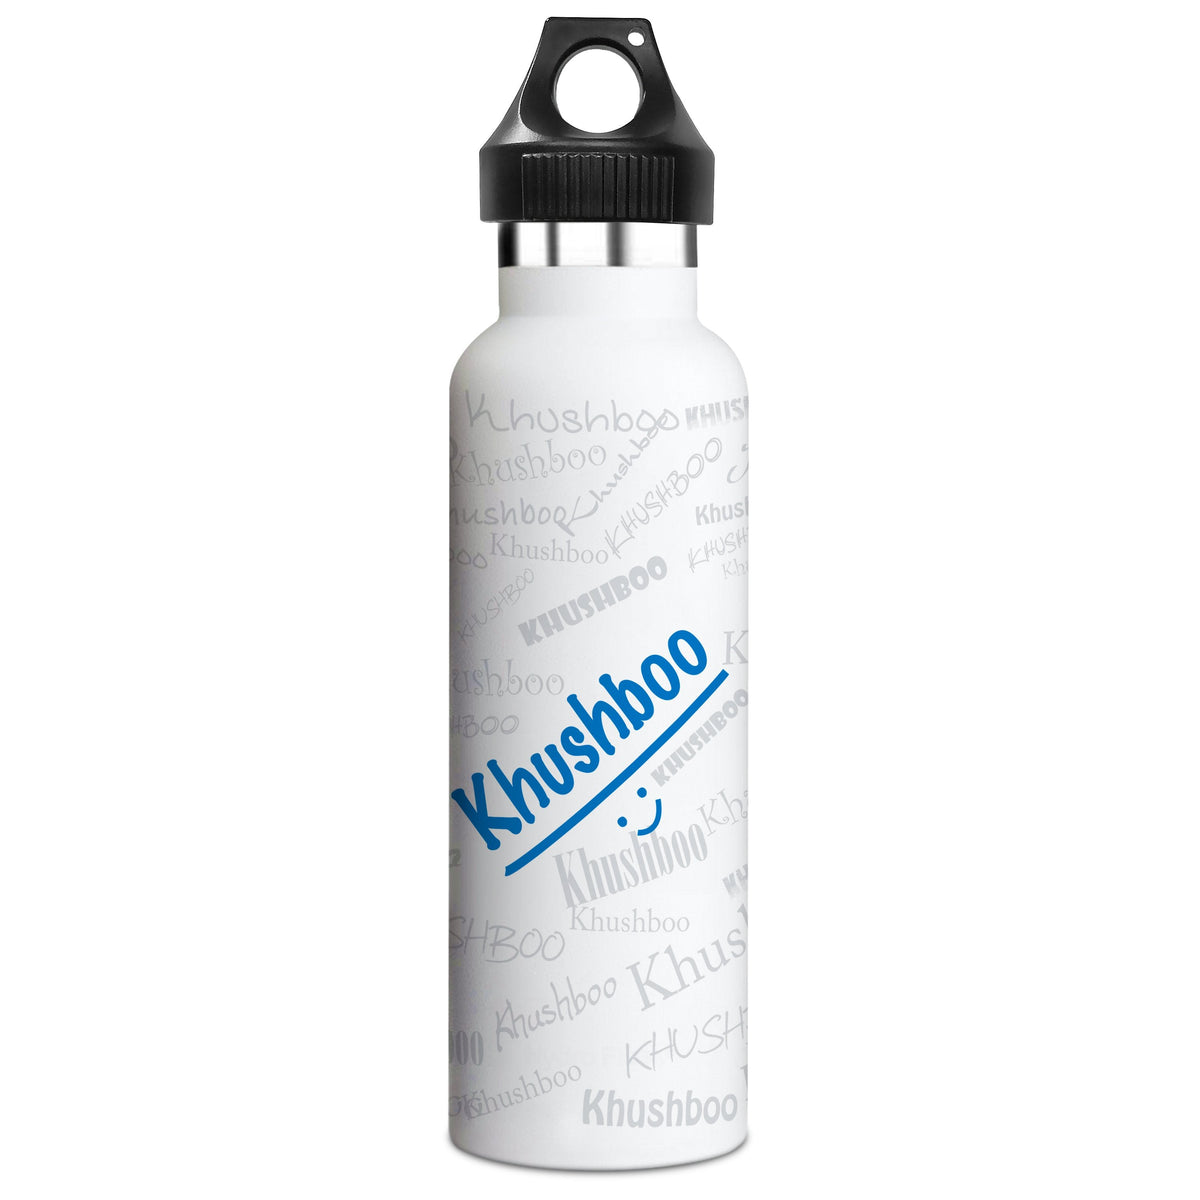 Me insulated graffiti bottle personalized stainless steel name water bottle